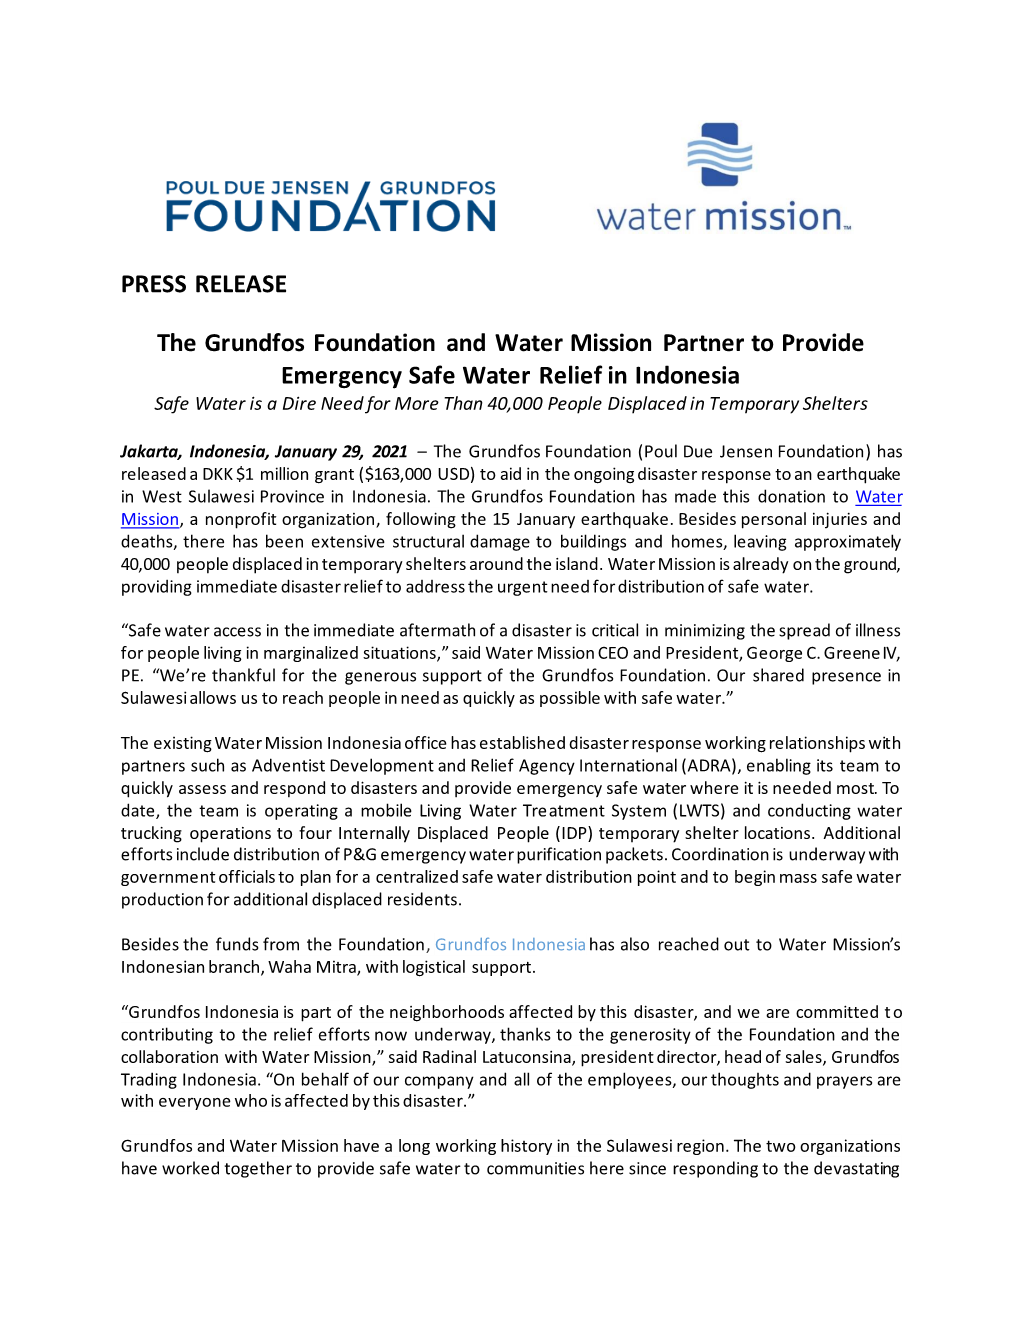 PRESS RELEASE the Grundfos Foundation and Water Mission